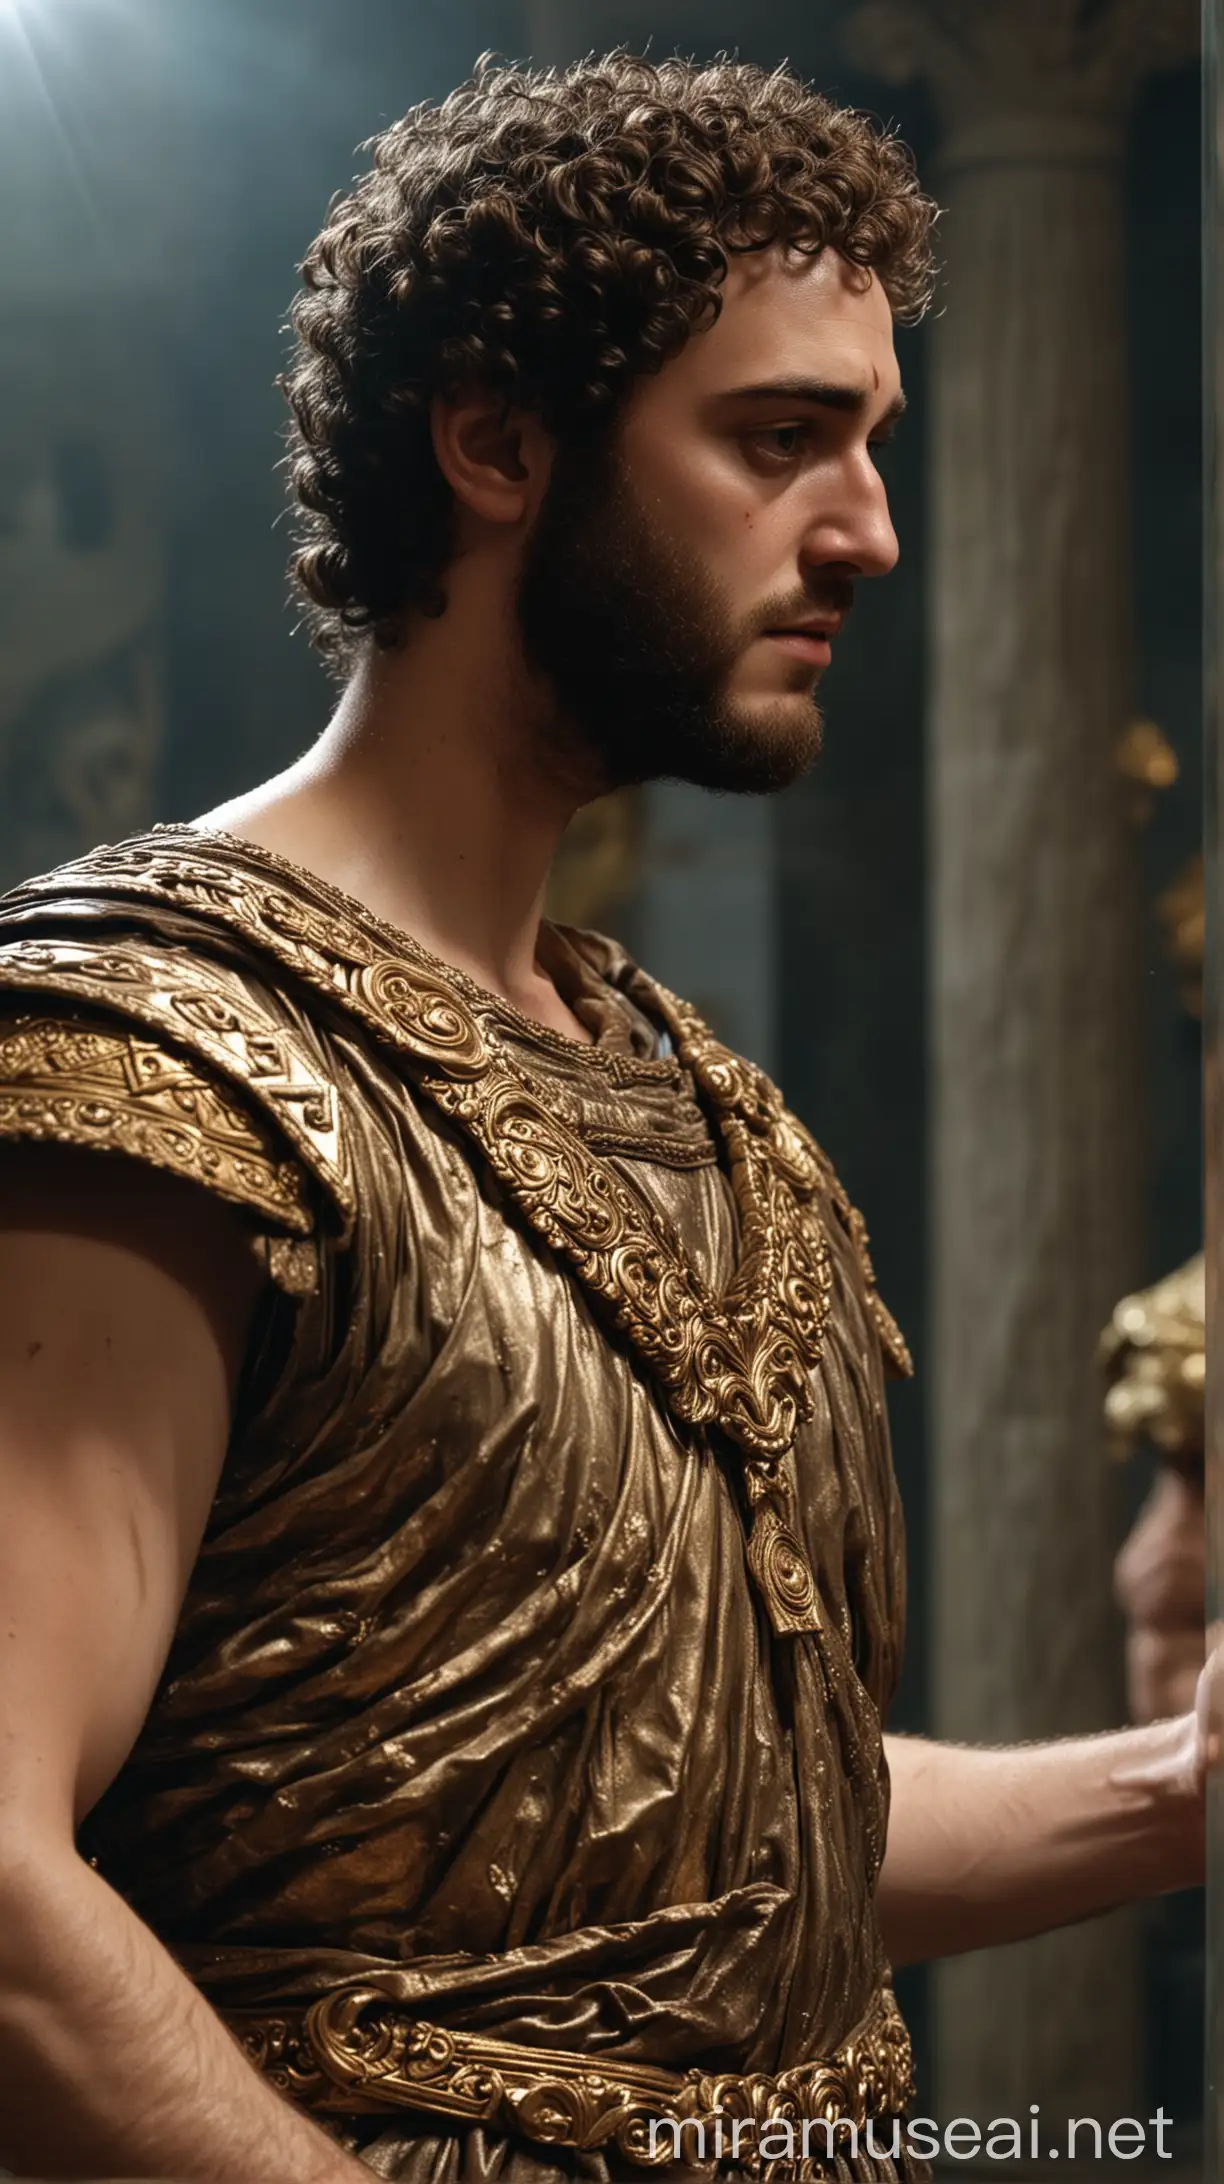 Clip of Commodus looking at his reflection, dressed as a demigod. hyper realistic